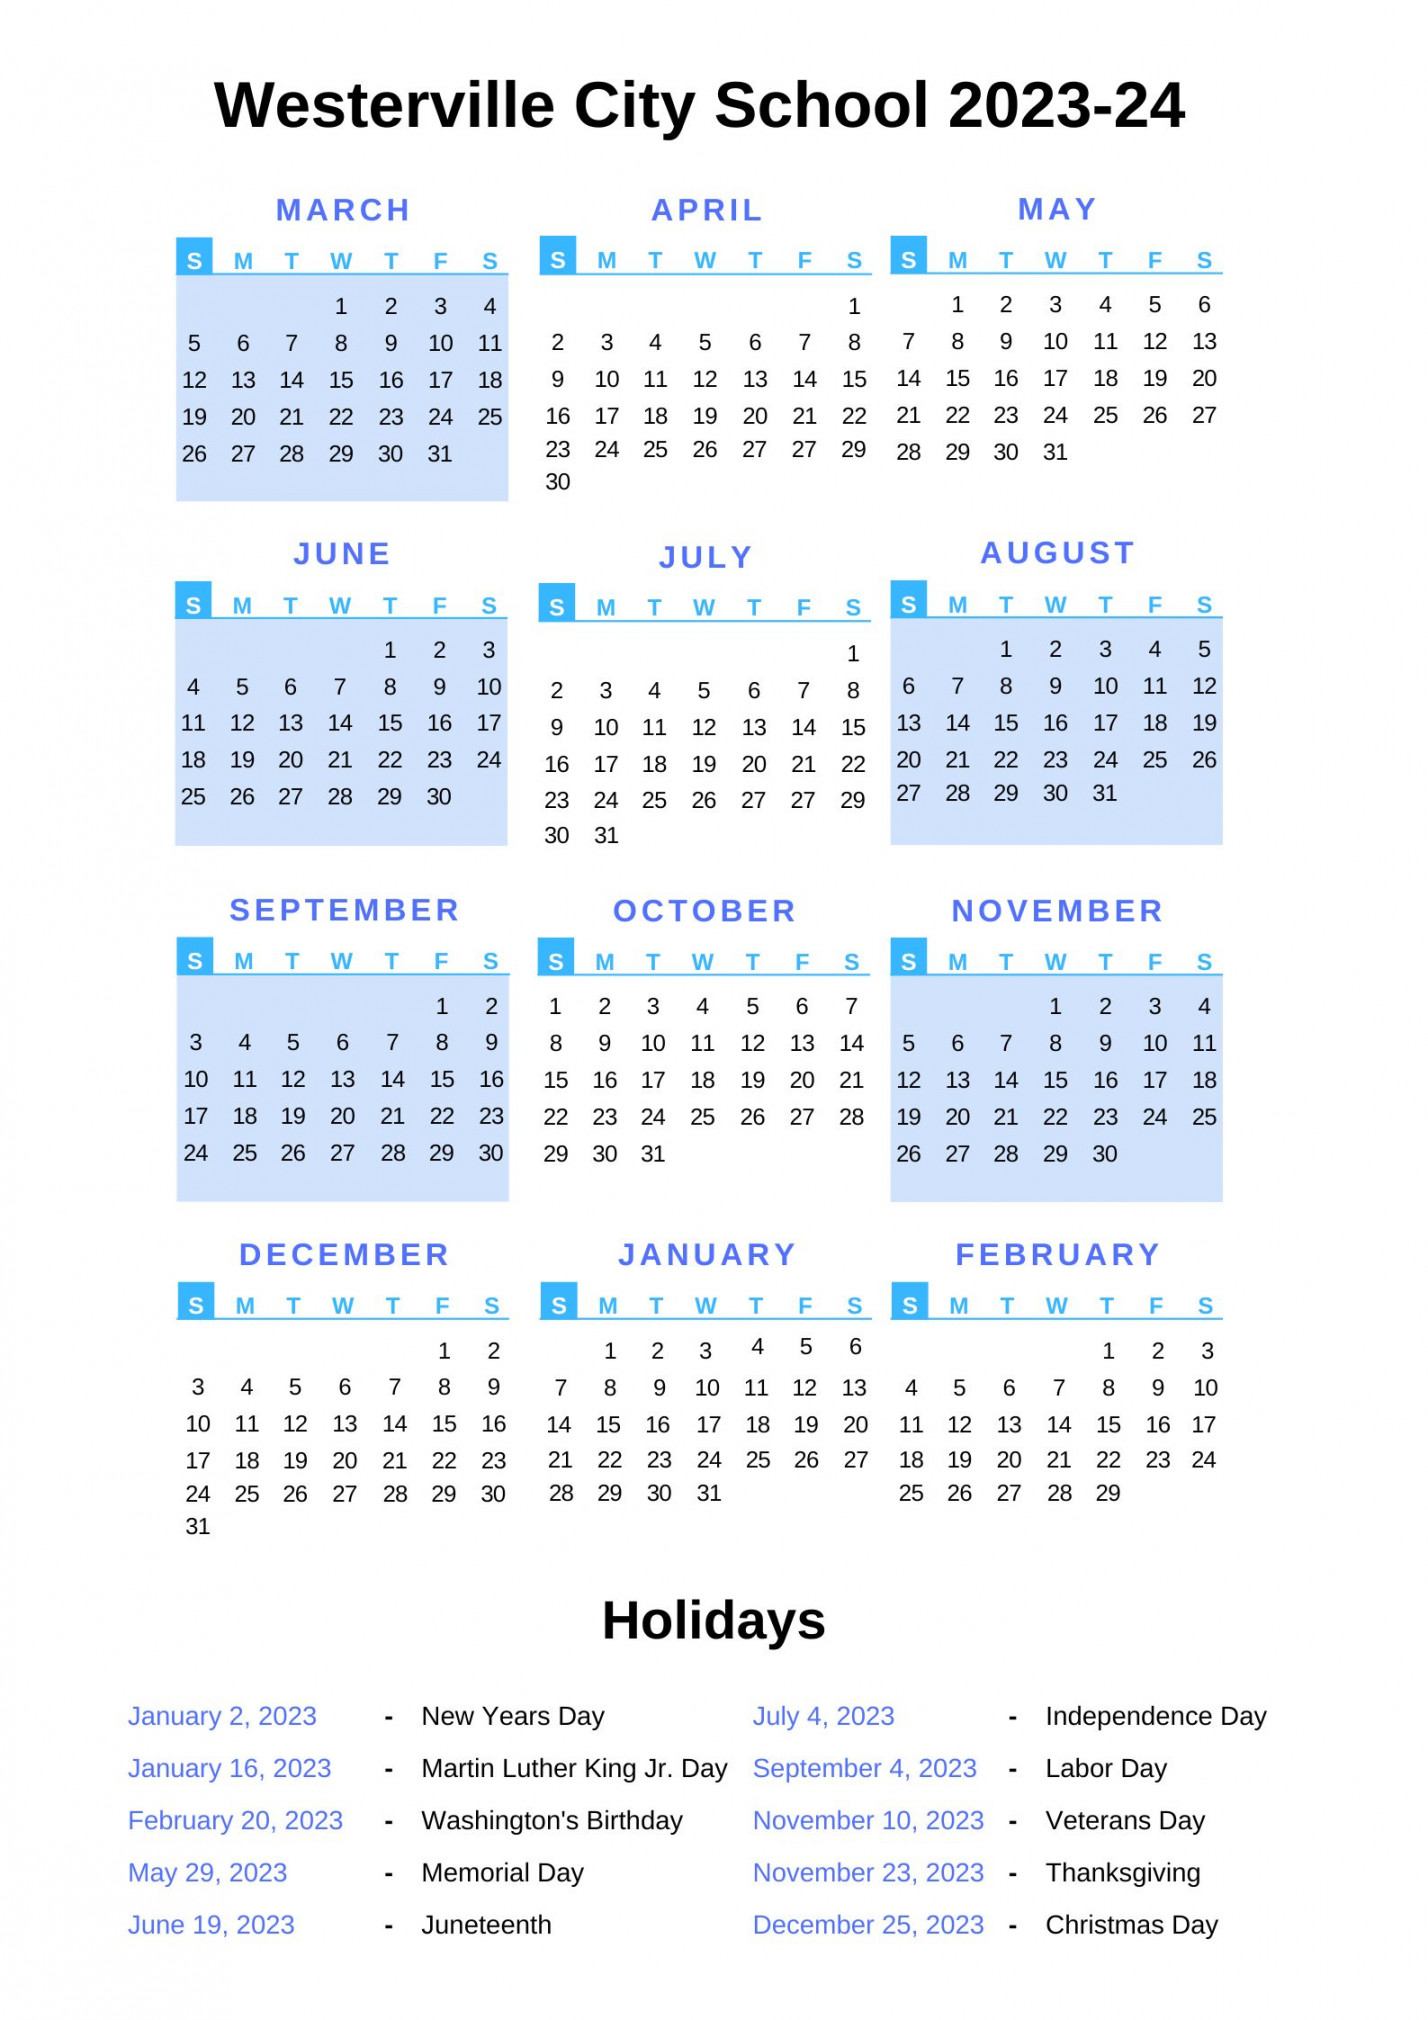 Westerville City Schools Calendar - With Holidays